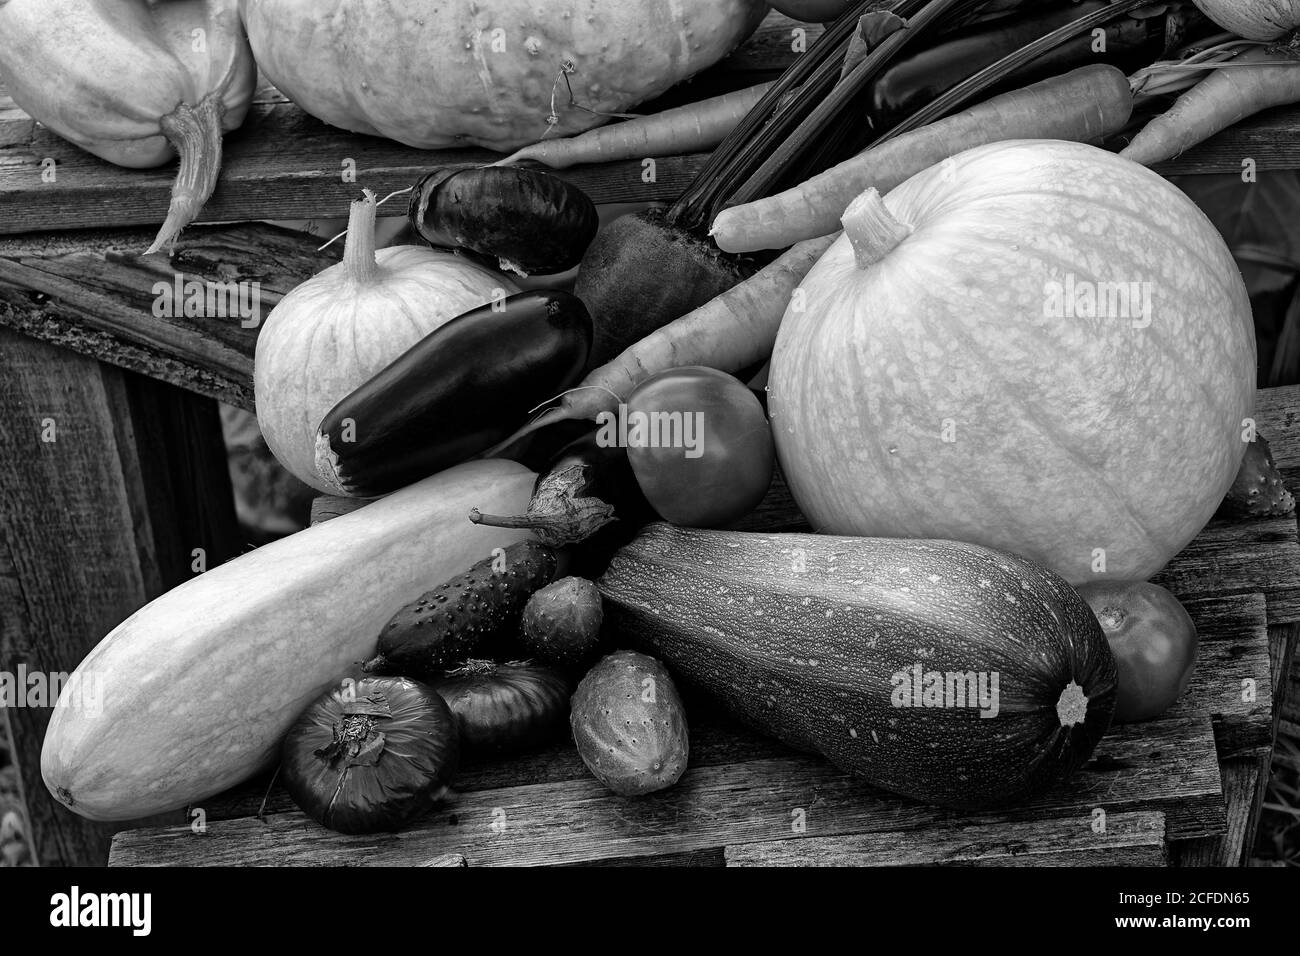 Photo vegetables,tomatoes, onions, red onions, eggplants, beets, pumpkins Stock Photo